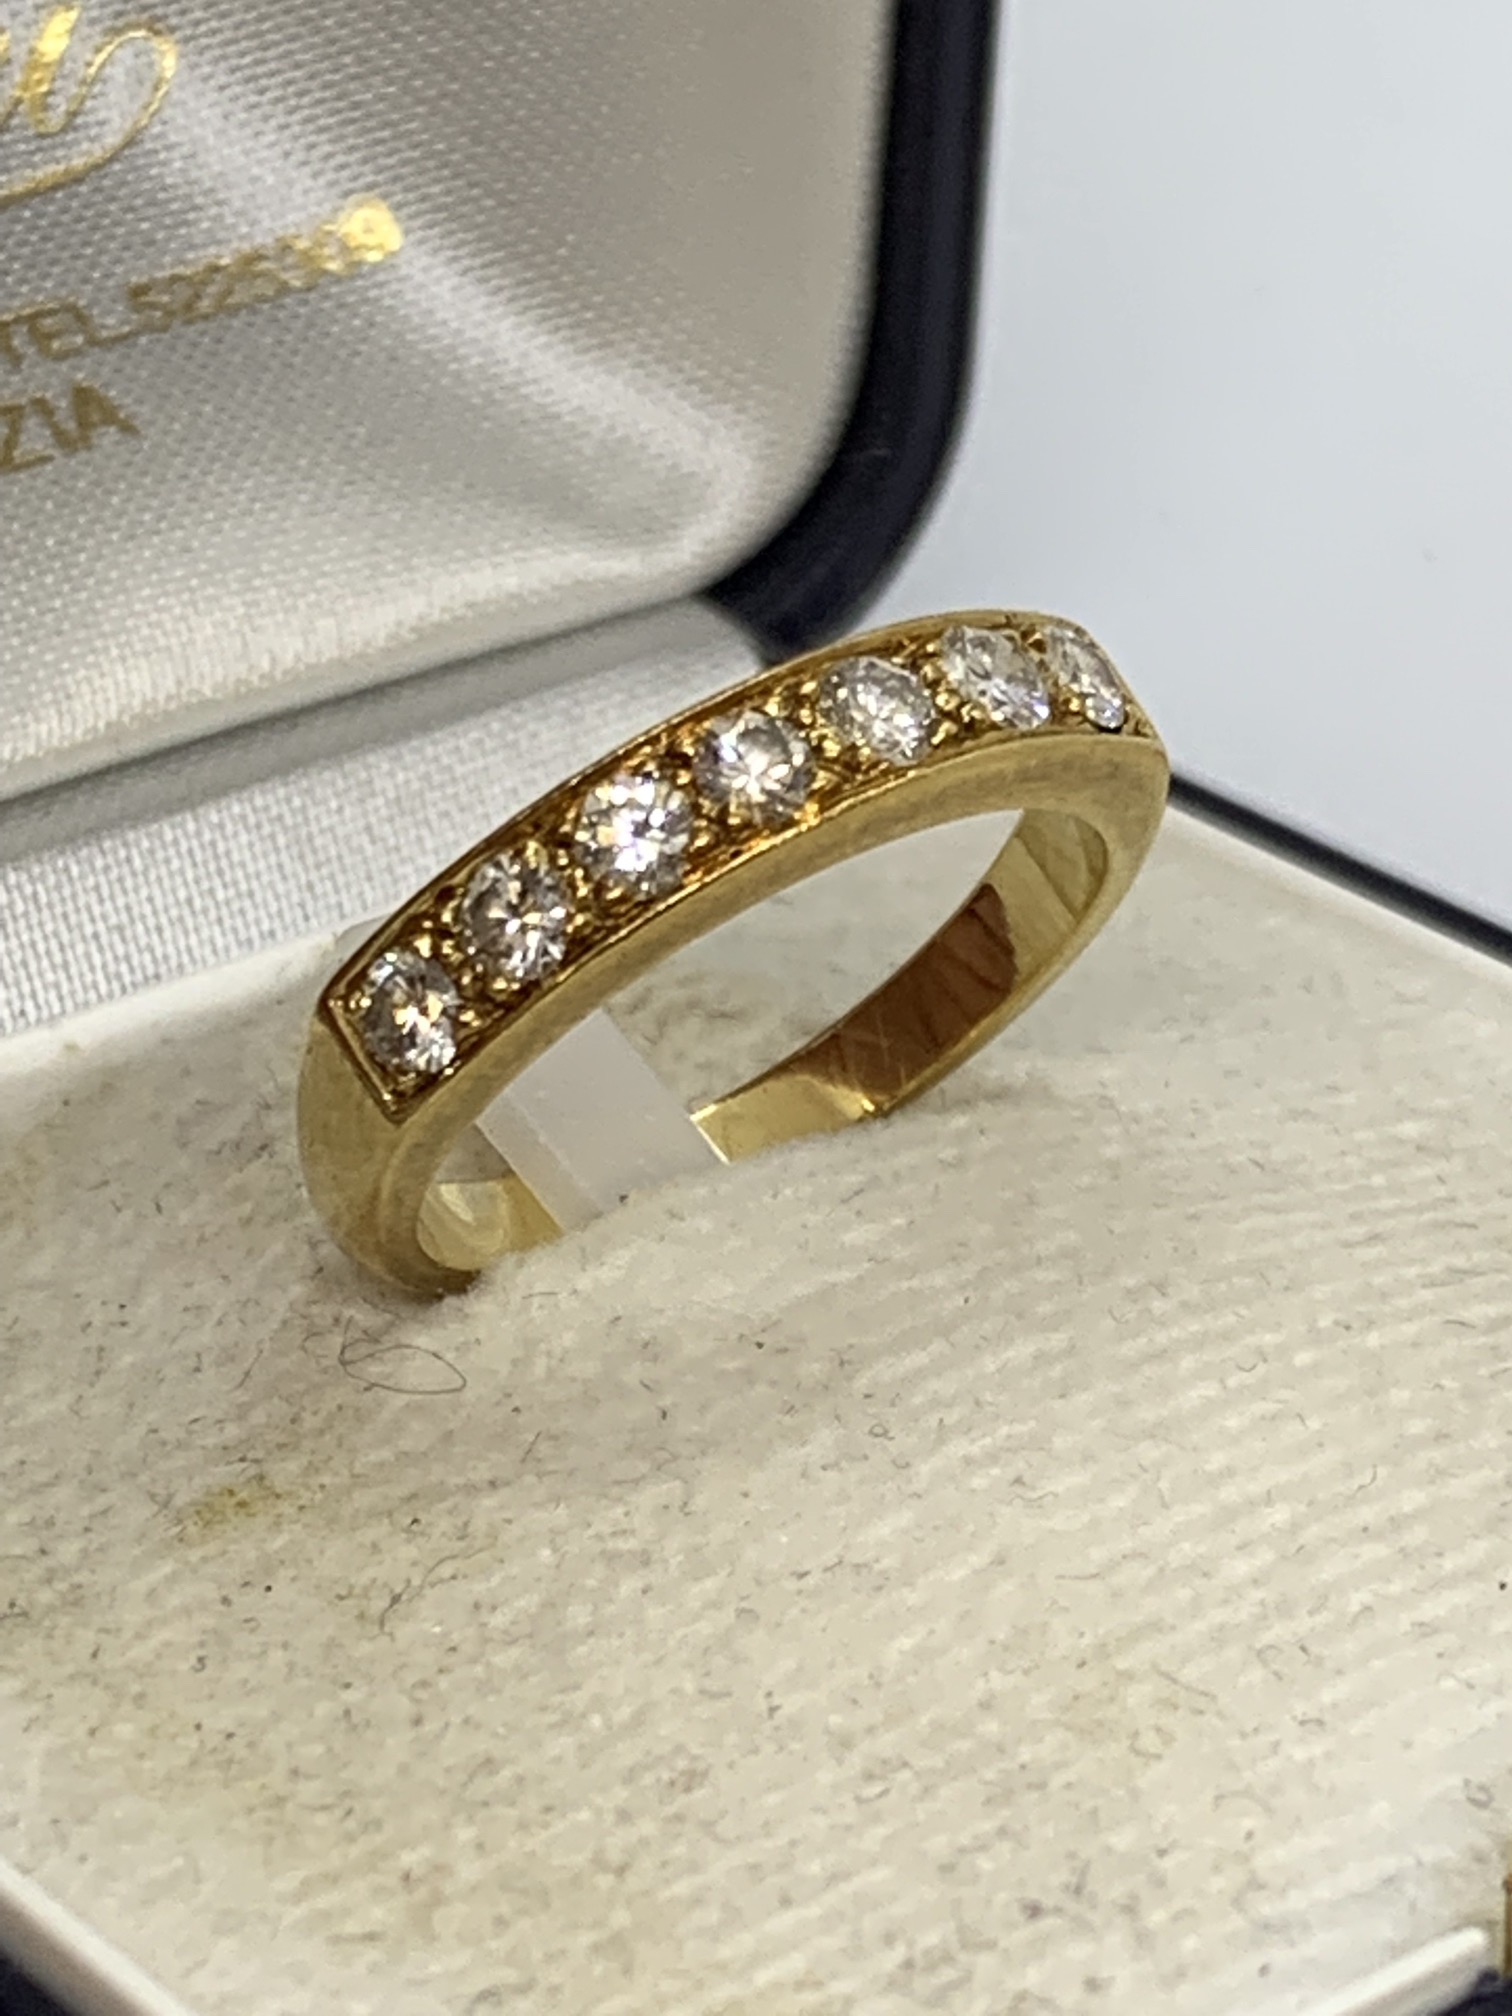 DIAMOND 1/2 ETERNITY RING IN 18ct YELLOW GOLD - 4.1g APPROX - SIZE M APPROX - Image 3 of 8